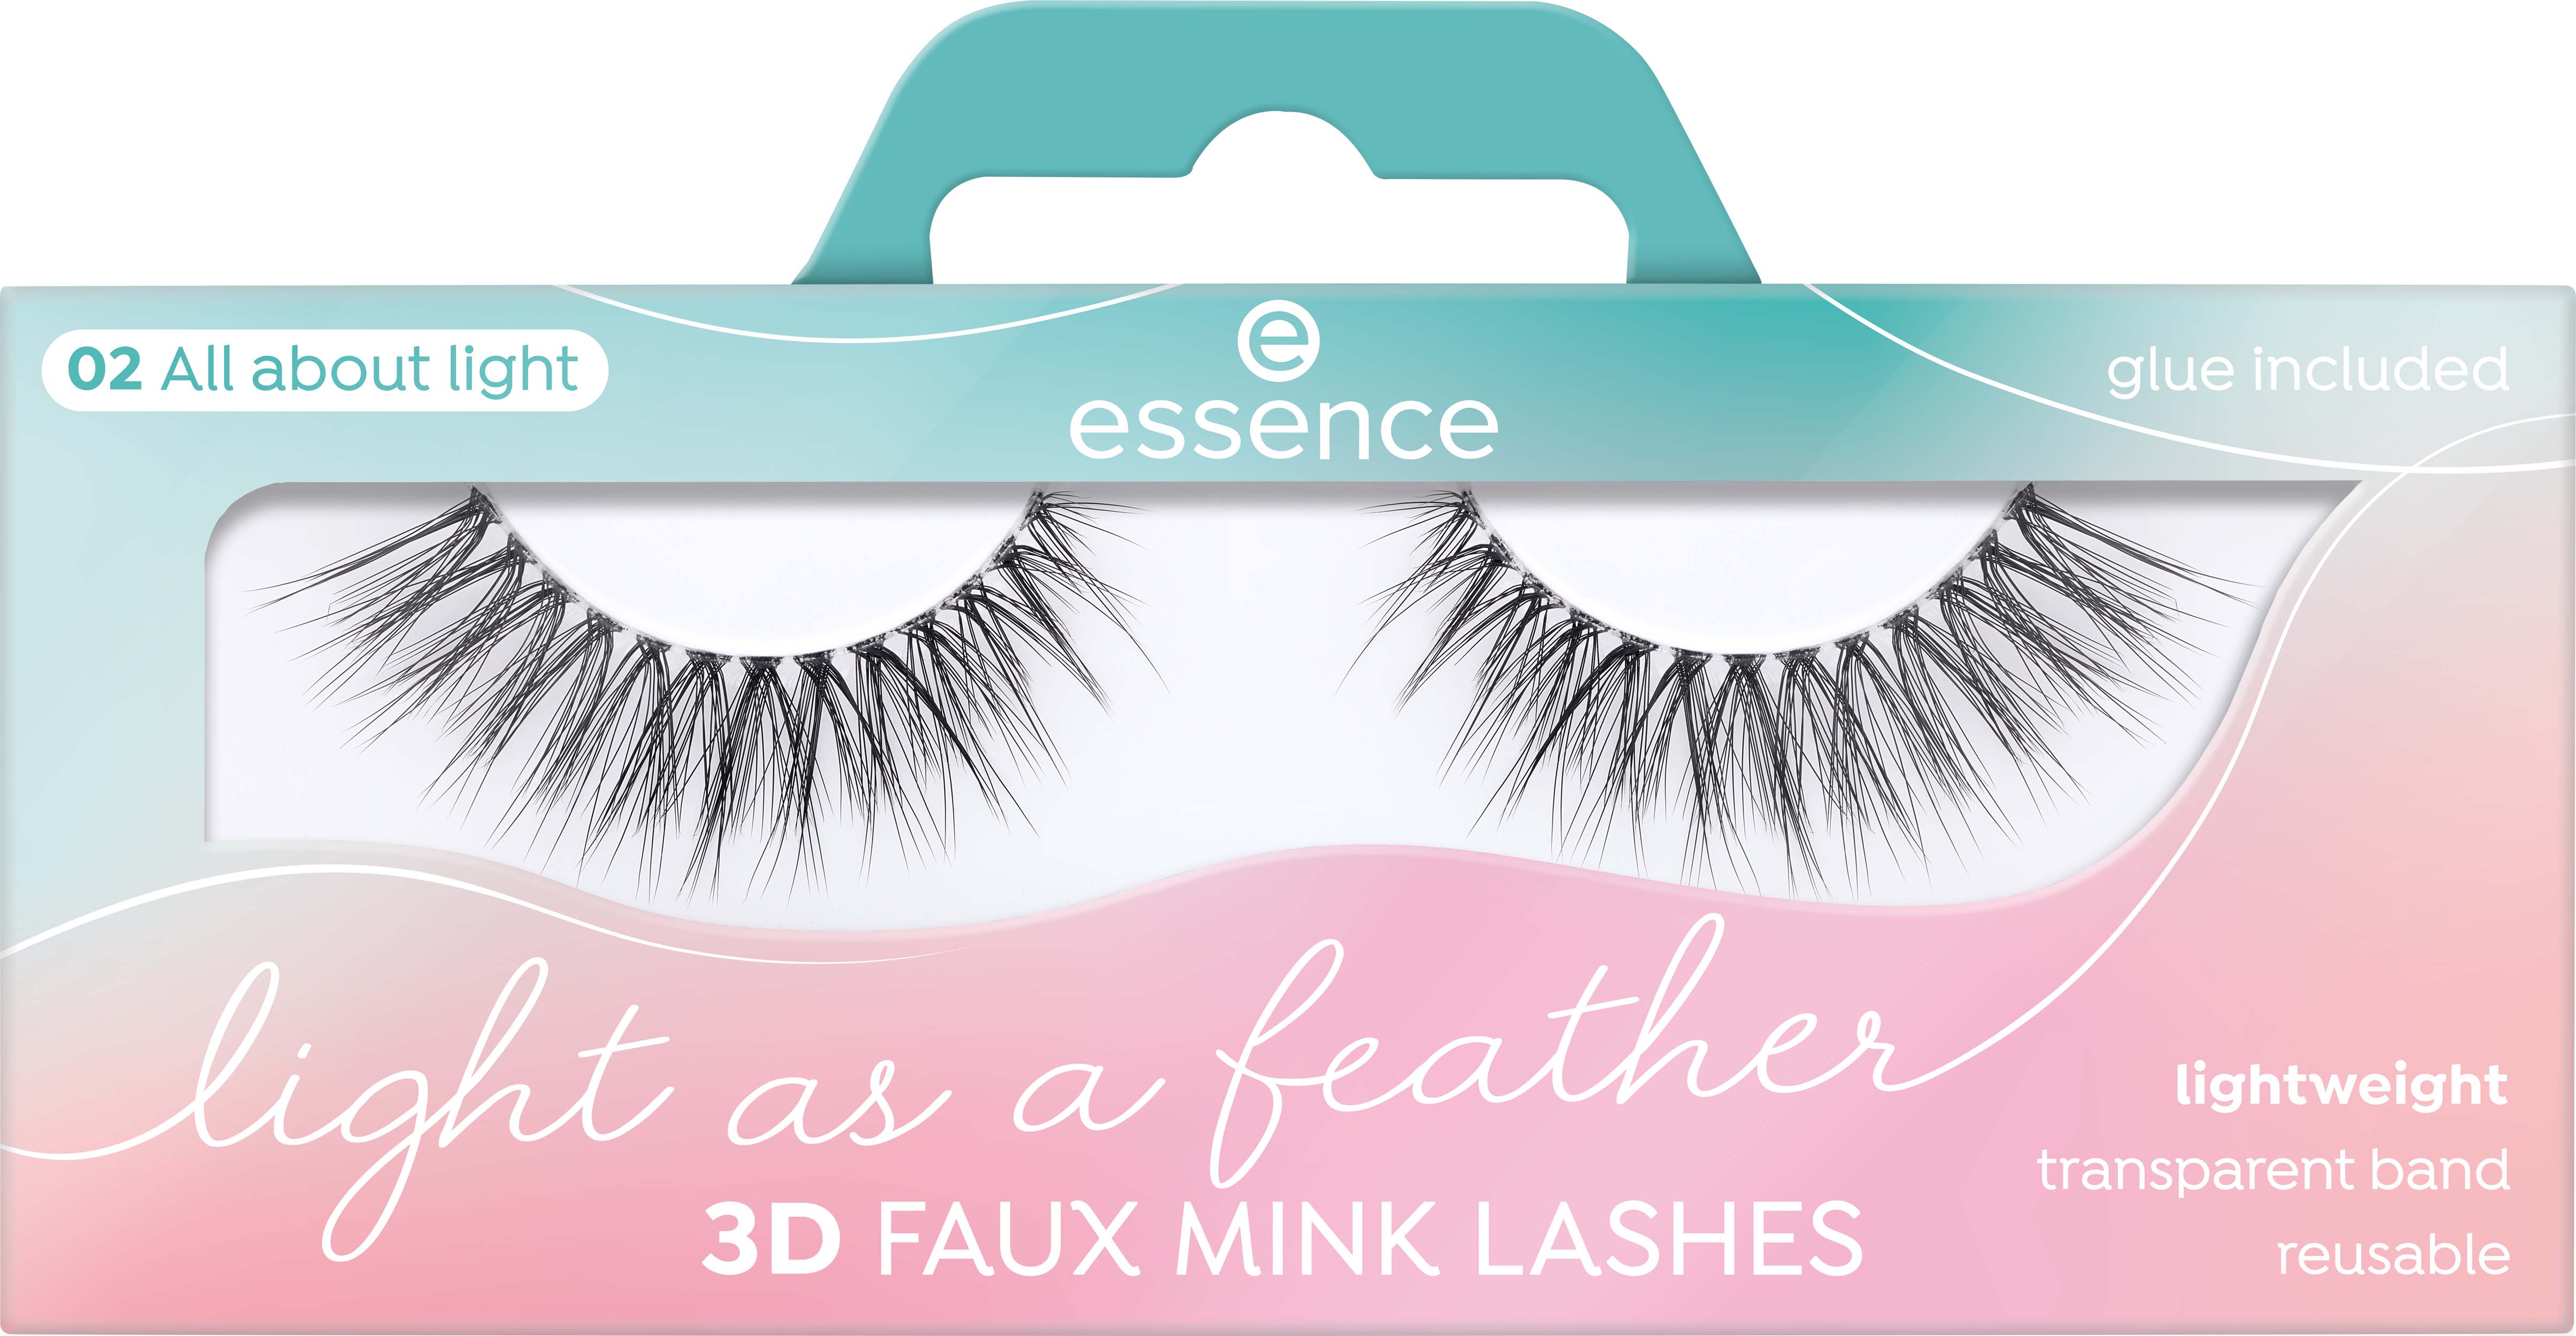 essence Light As A Feather 3D Faux Mink Lashes 02 All about light